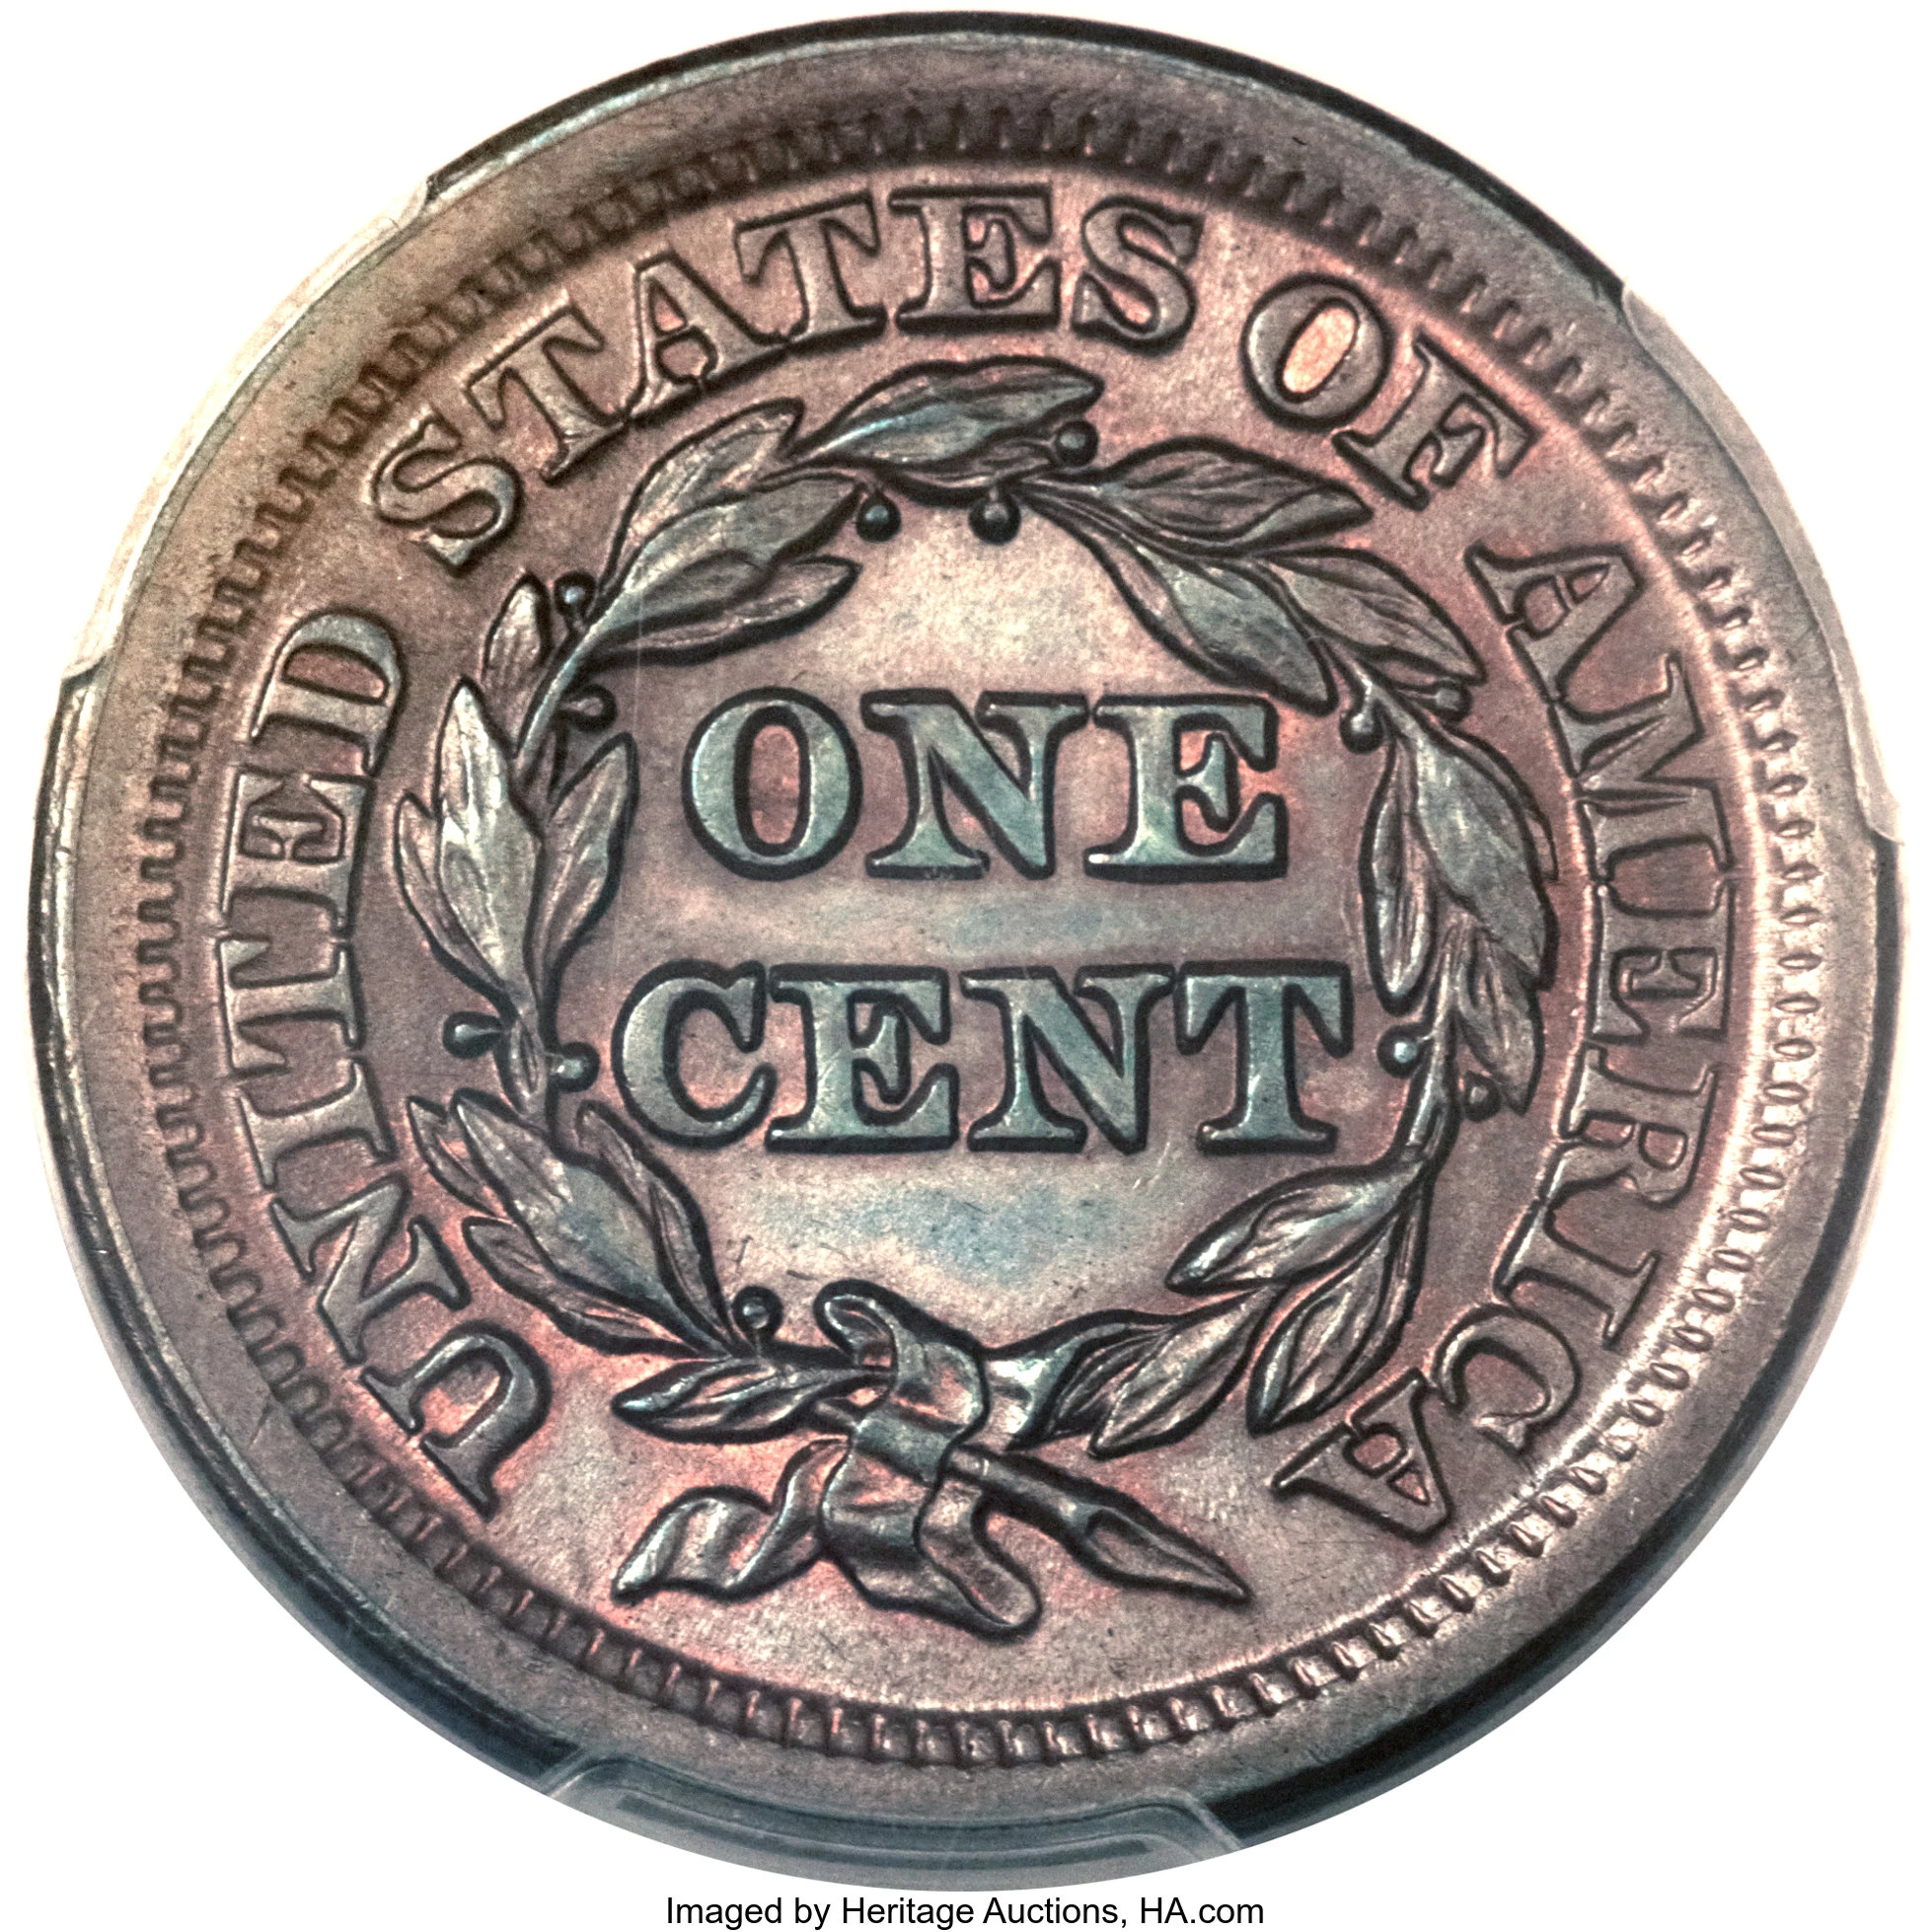 RARE 1853 BRAIDED HAIR LARGE CENT 1c PCGS AU -55 AWESOME COIN AMAZING  CONDTION